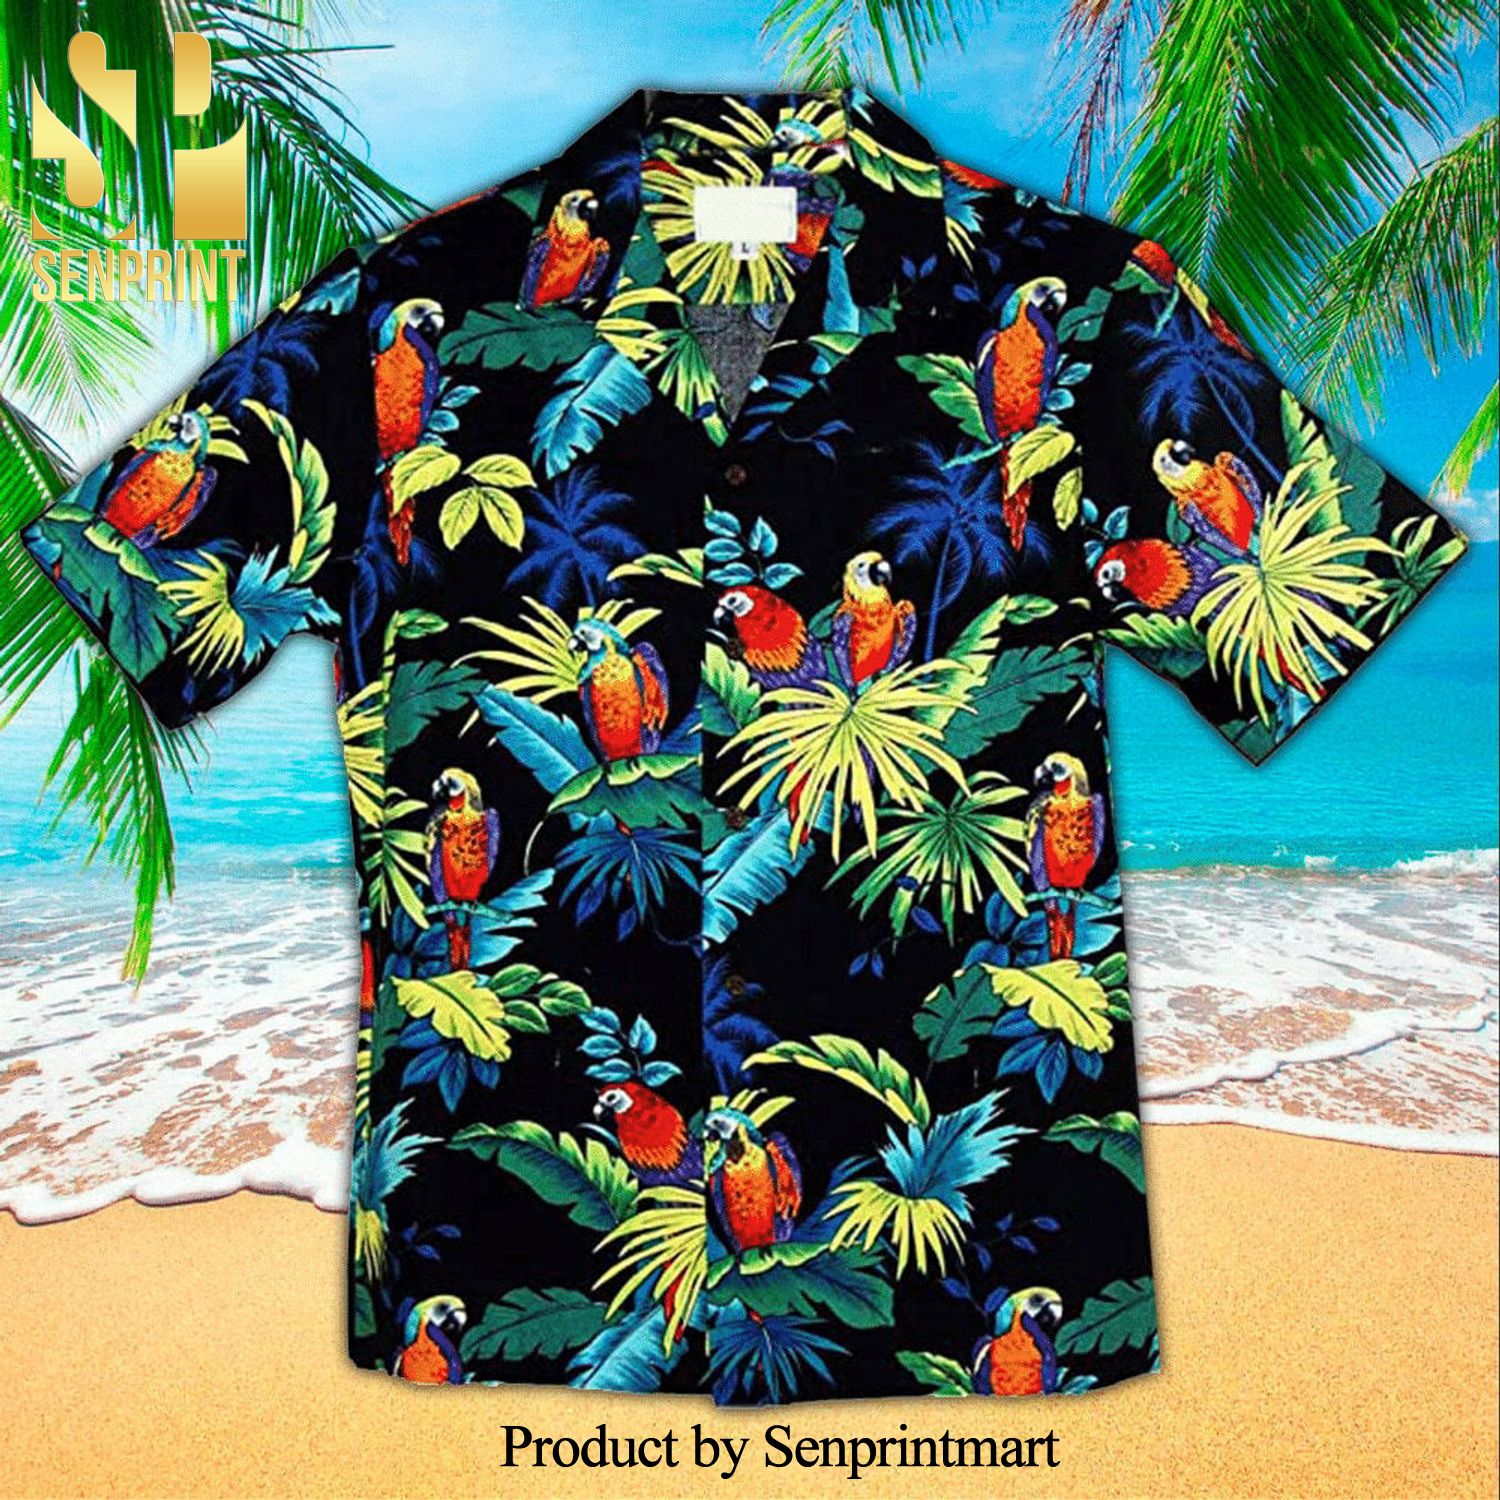 Red-Breasted Toucan Tropical New Outfit Hawaiian Shirt